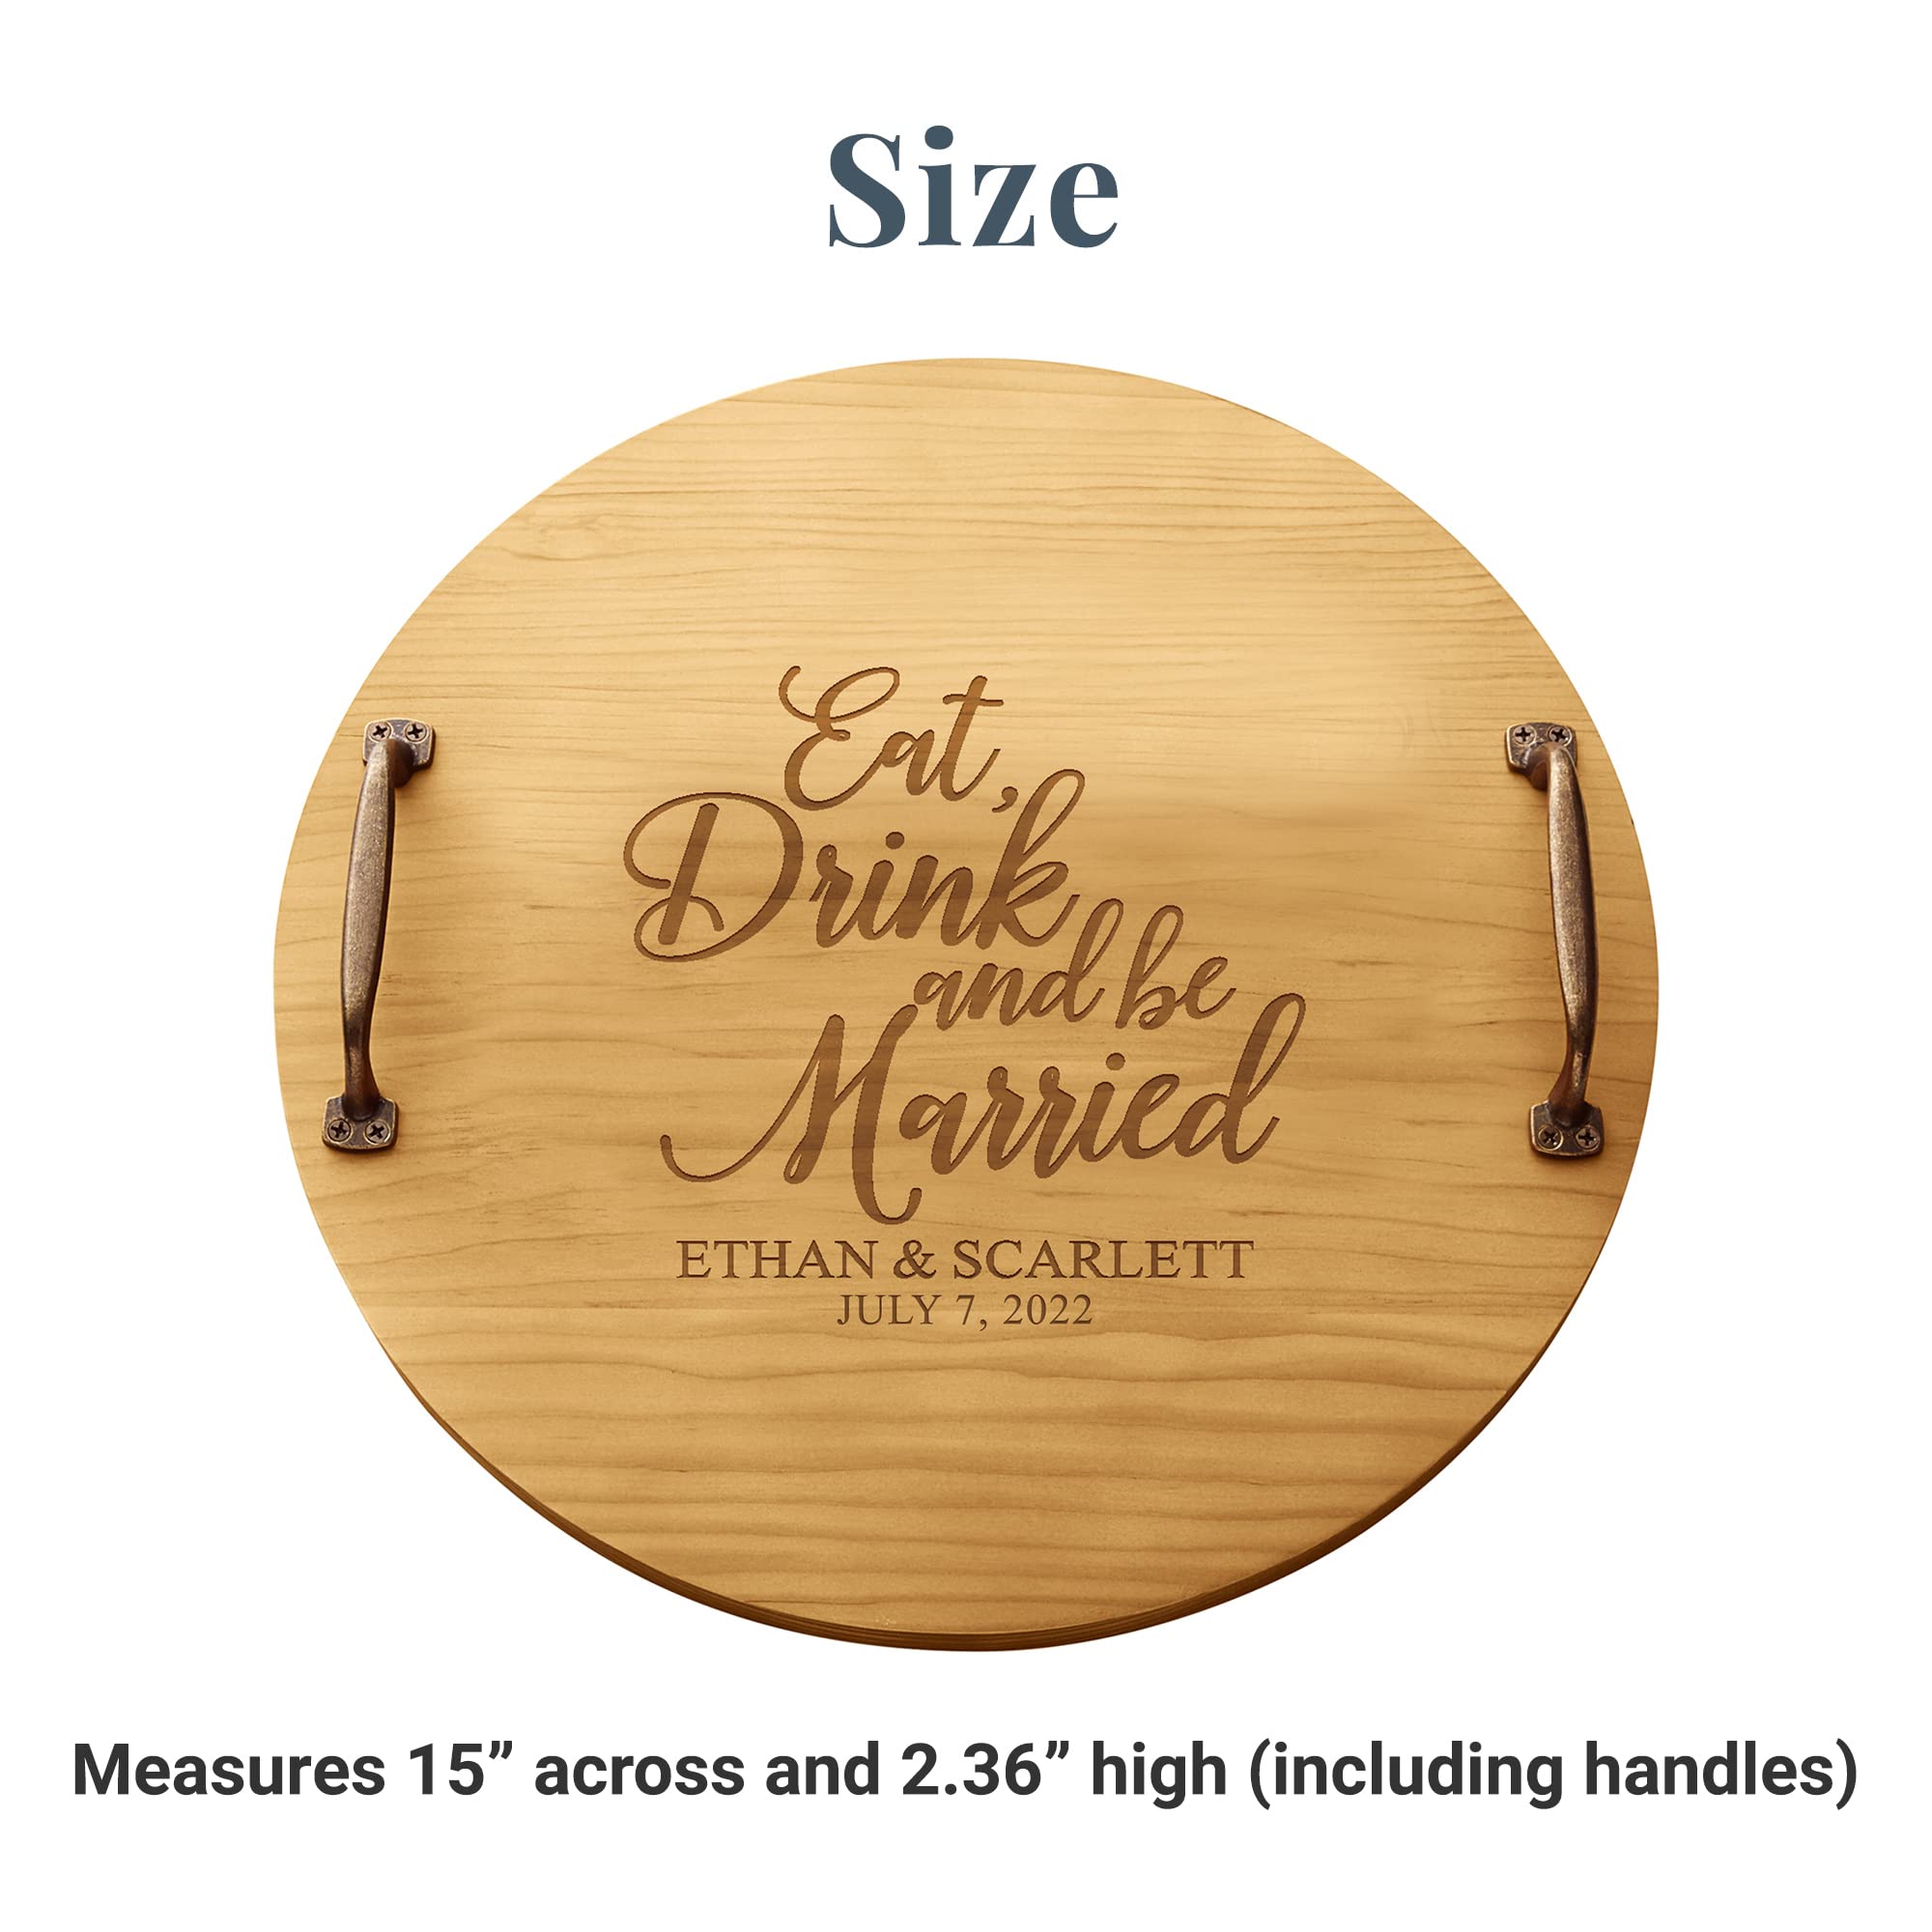 Let's Make Memories Personalized Eat, Drink & Be Married Wood Barrel Tray - Wedding - Newlyweds